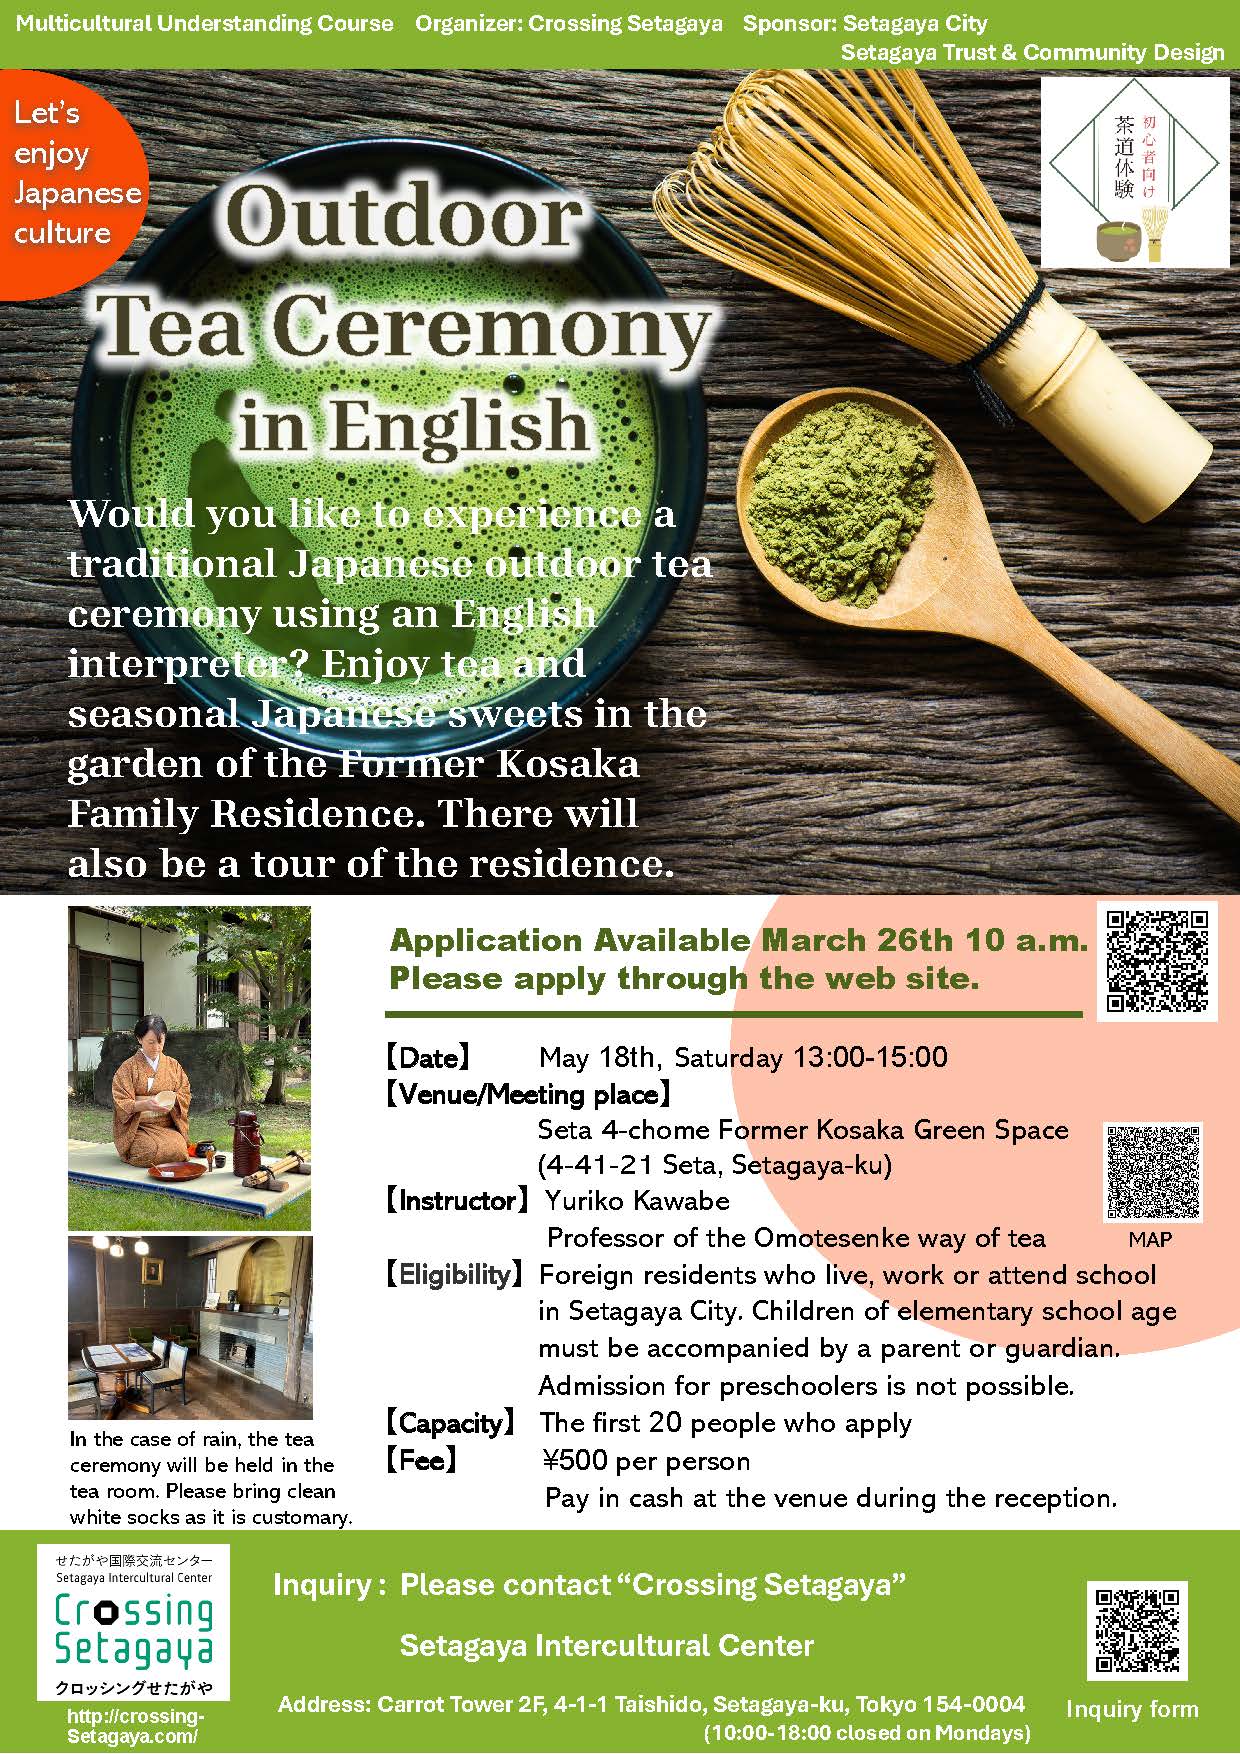 ＜New Applicants Waitlisted＞Outdoor Tea Ceremony in English (Held on 5/18)